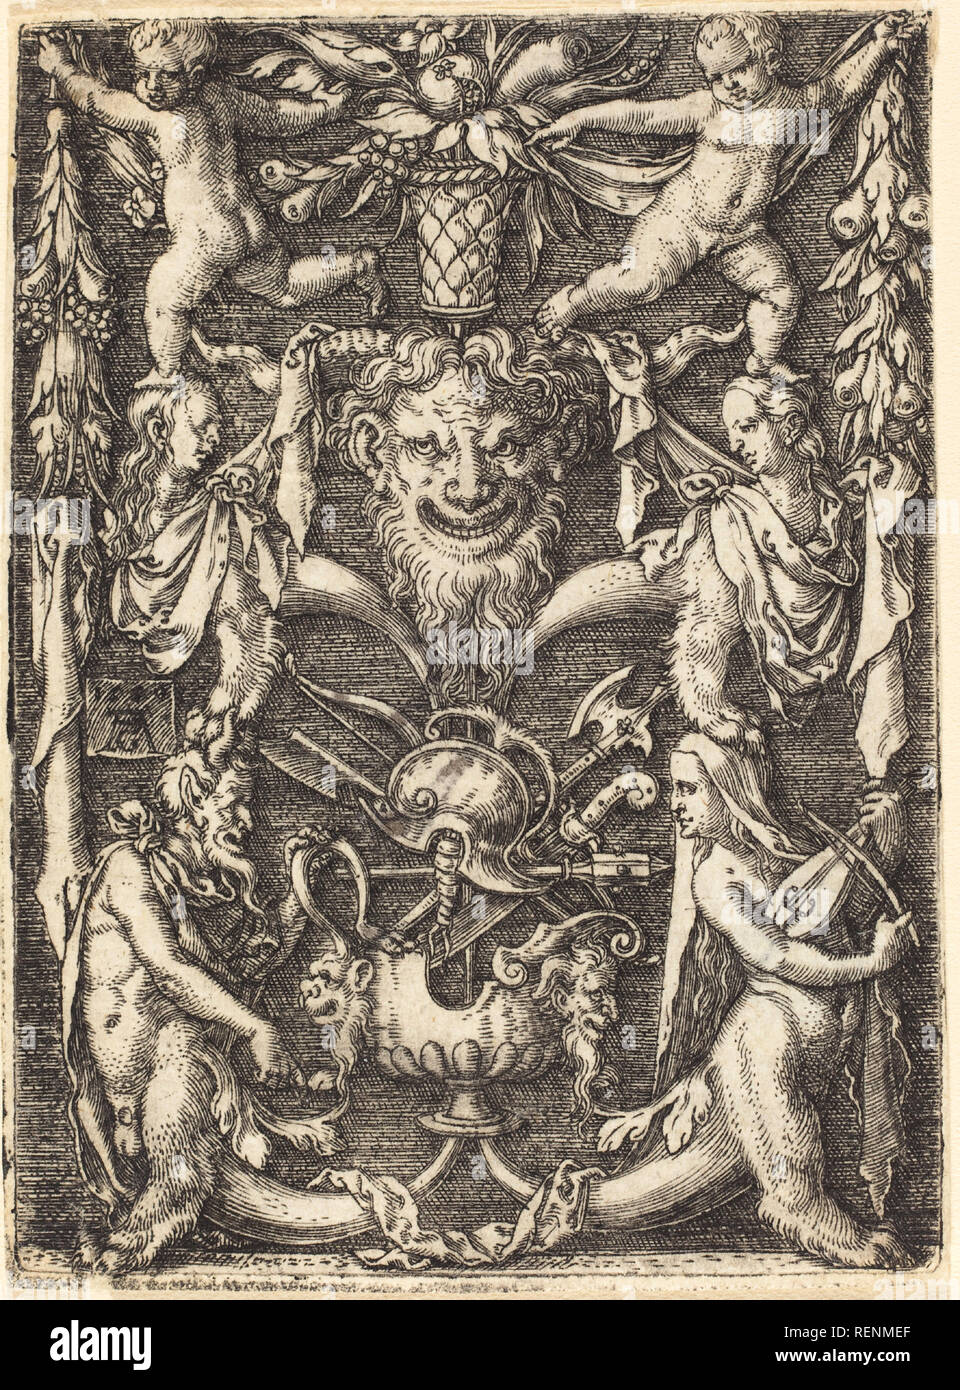 Ornament with Mask. Dated: 1550. Medium: engraving. Museum: National Gallery of Art, Washington DC. Author: Heinrich Aldegrever. Stock Photo